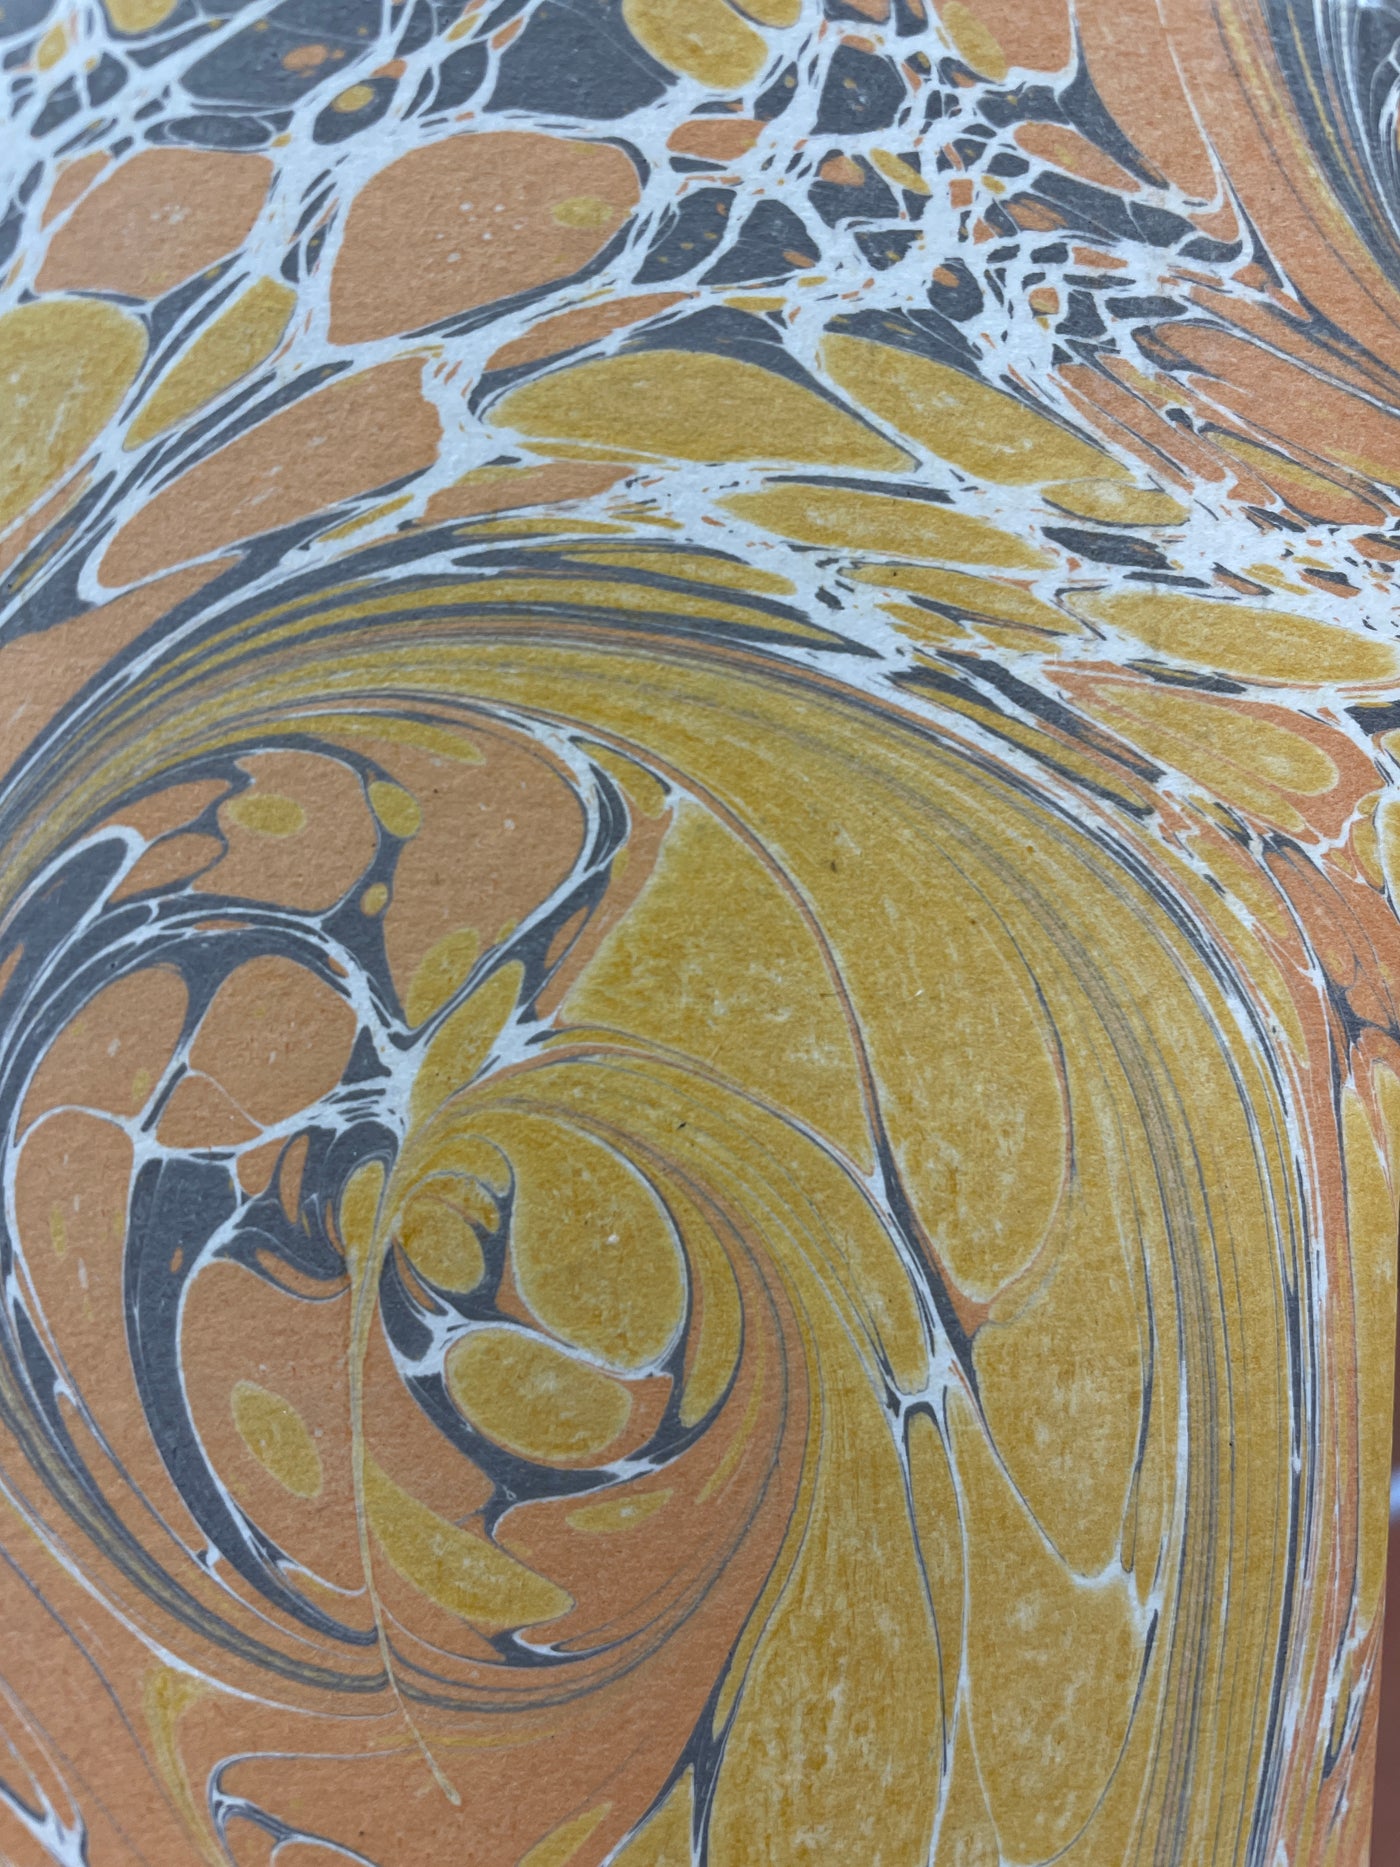 Marbled Paper Lined Notebooks